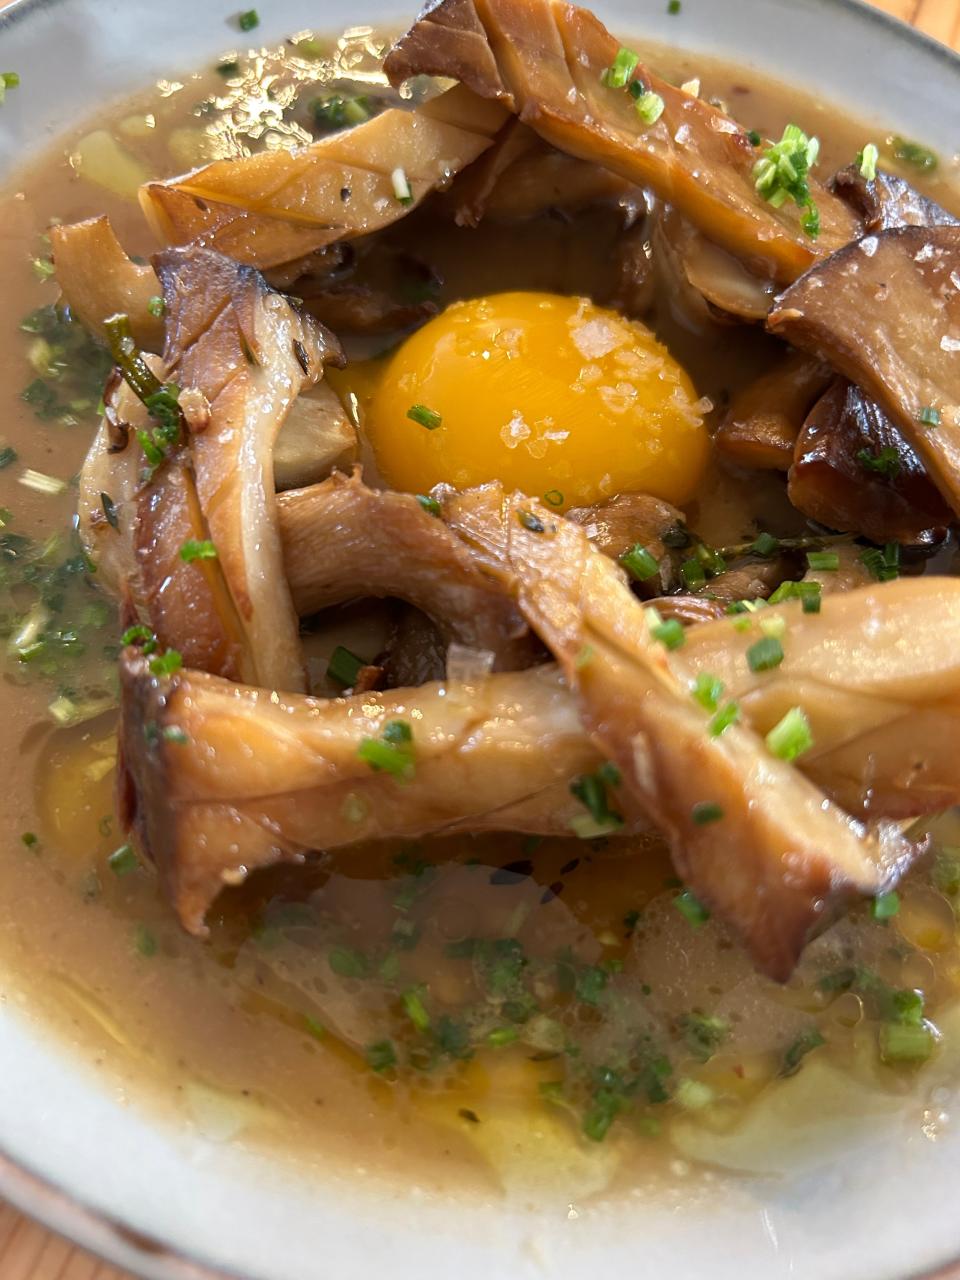 Roasted King Mushrooms "Basque Style" at The Daley Trade in Titusville come roasted and chicken and sherry reduction with fresh herbs and a Lake Meadows Naturals egg yolk.